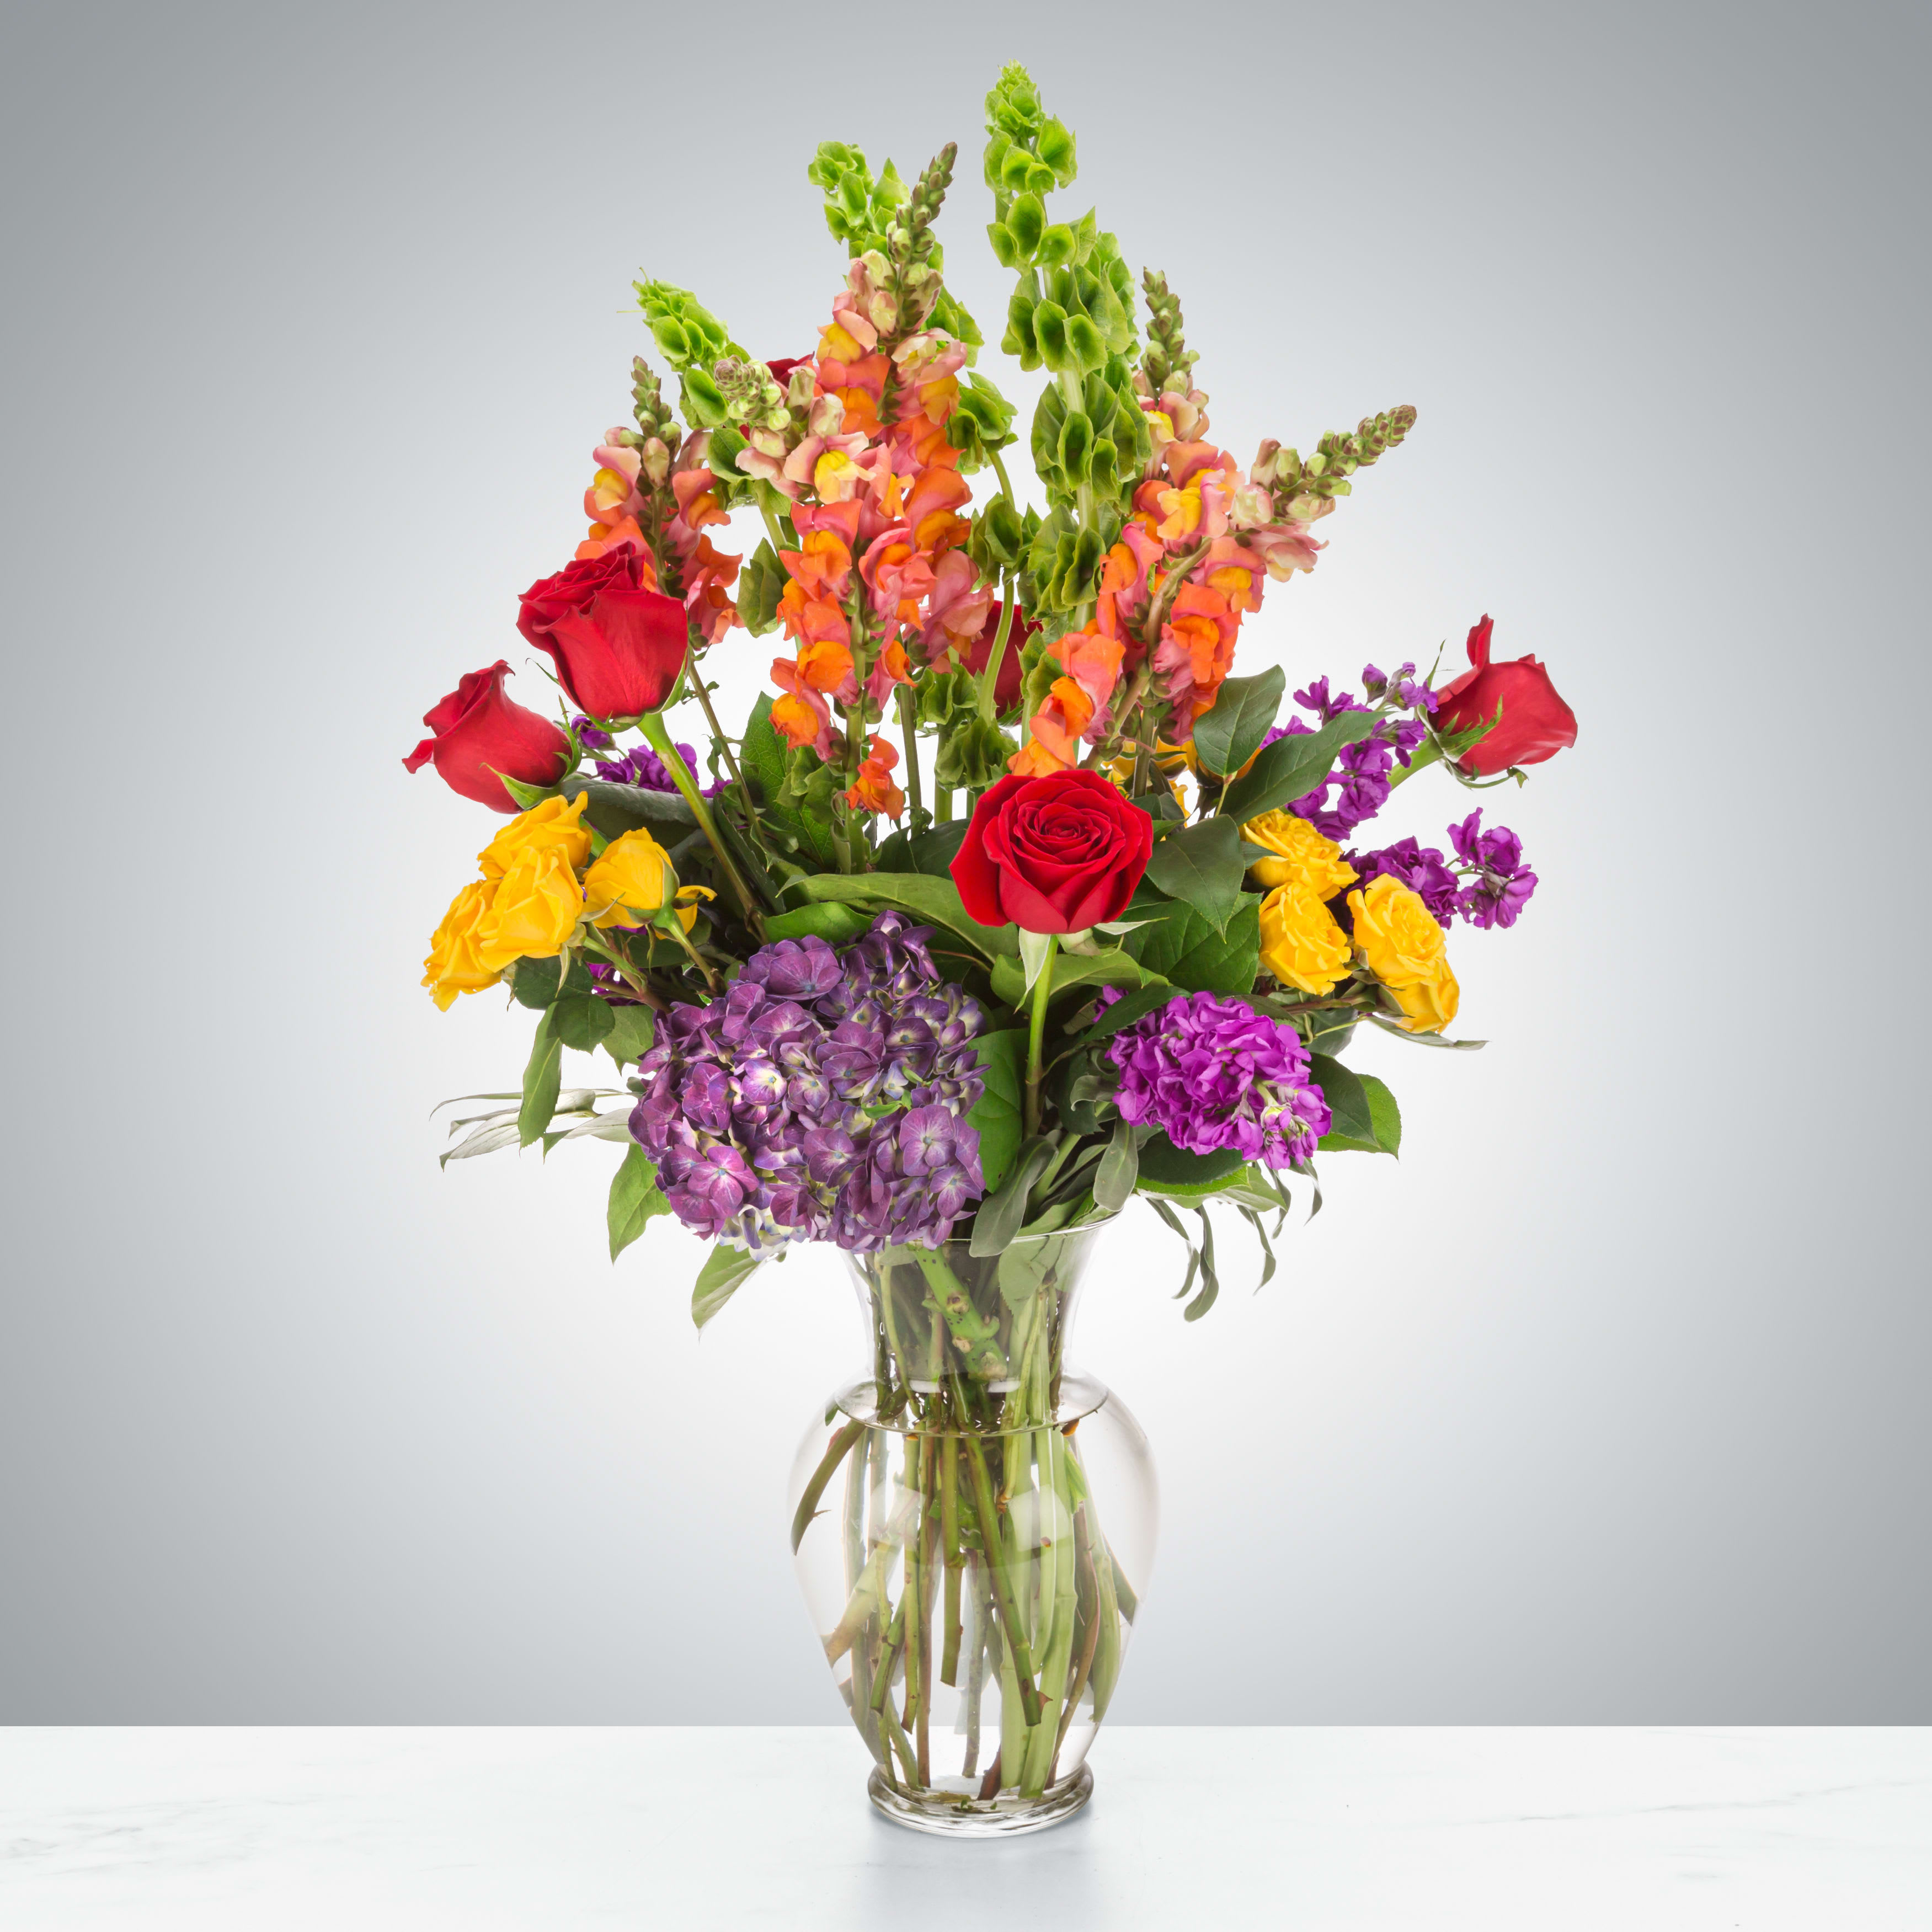 Floral Fantasy. - A rich riot of colors, this mixed arrangement makes a big impression with all its different textures and premium flowers. Featuring red roses, peach snapdragons, bells of Ireland, purple hydrangea, and stock this arrangement makes a great anniversary or congrats gift.  